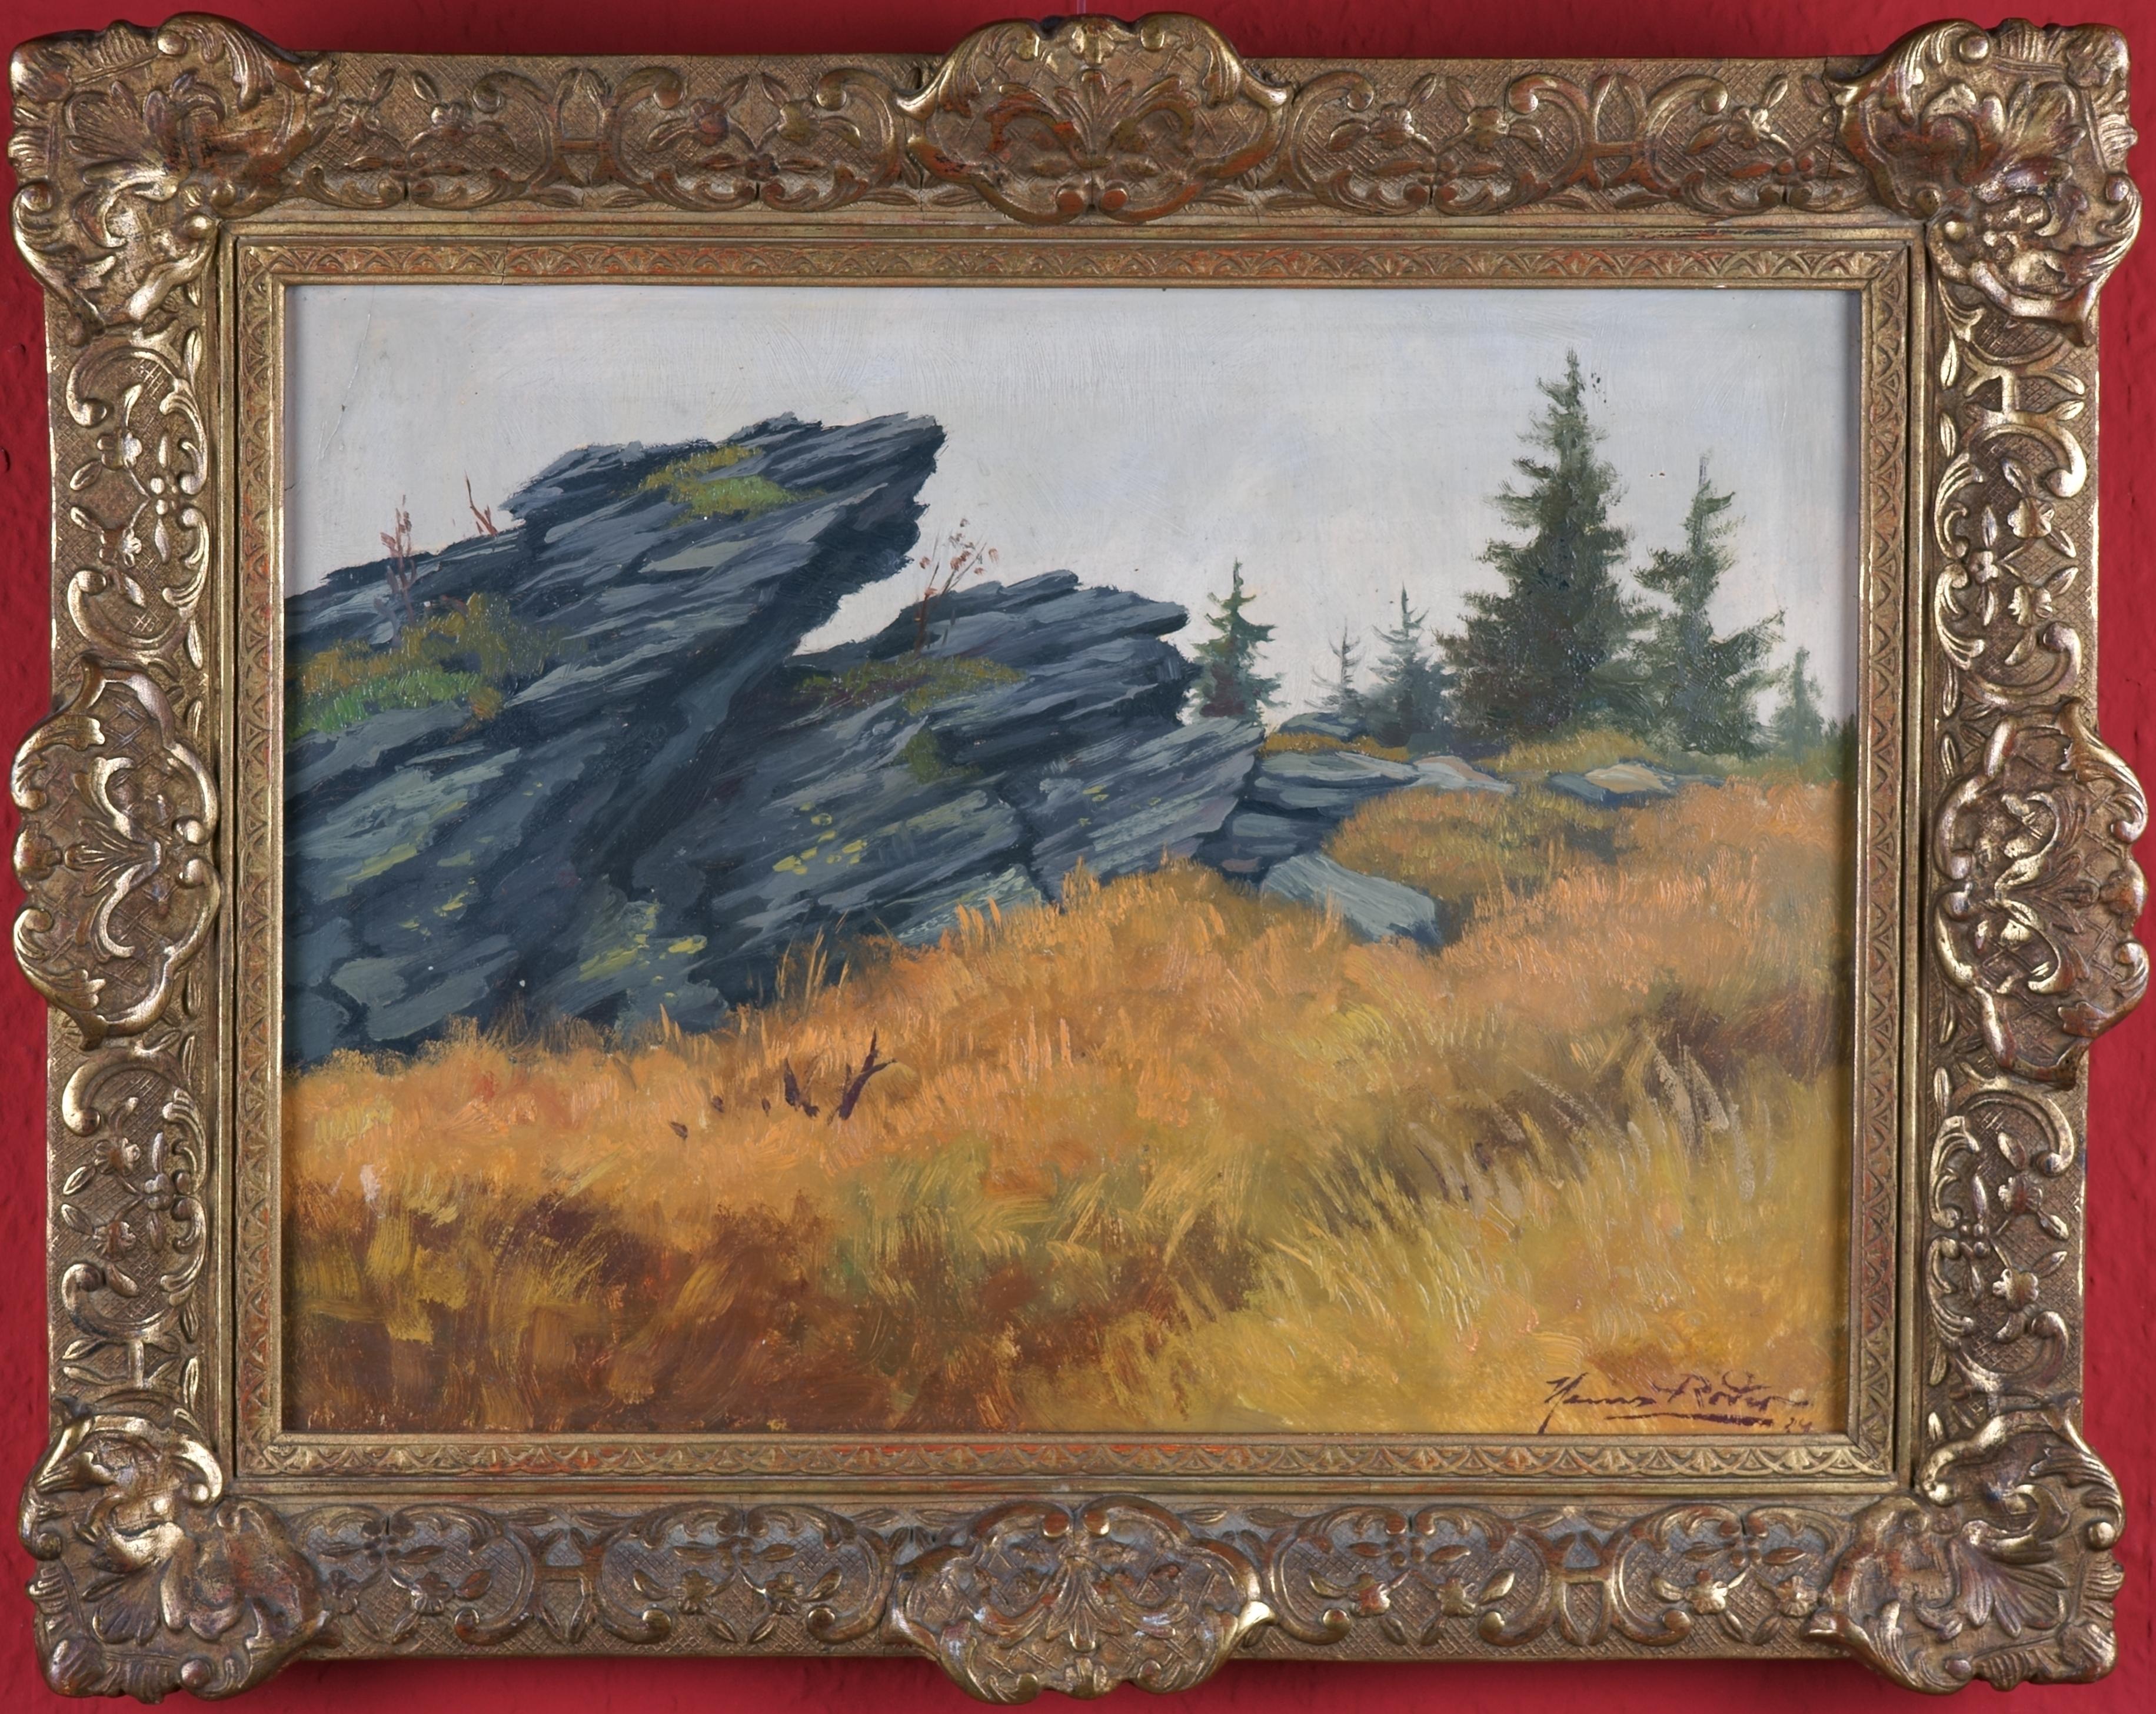 Low Mountain Landscape with Rocks - The mystery of an inconspicuous place - - Painting by Heinz Roder